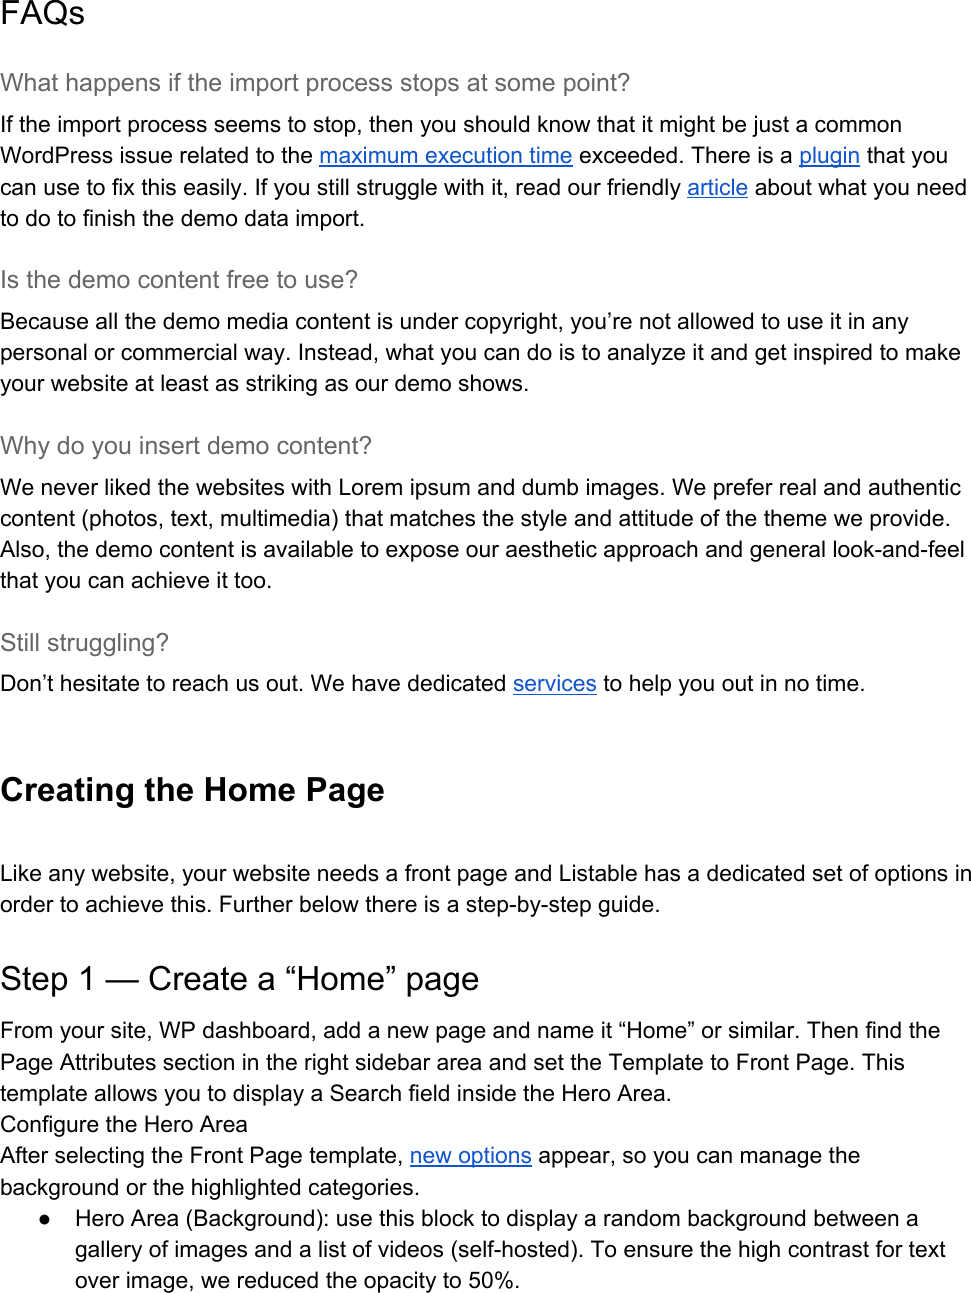 Page 4 of 9 - Listable-User-Guide